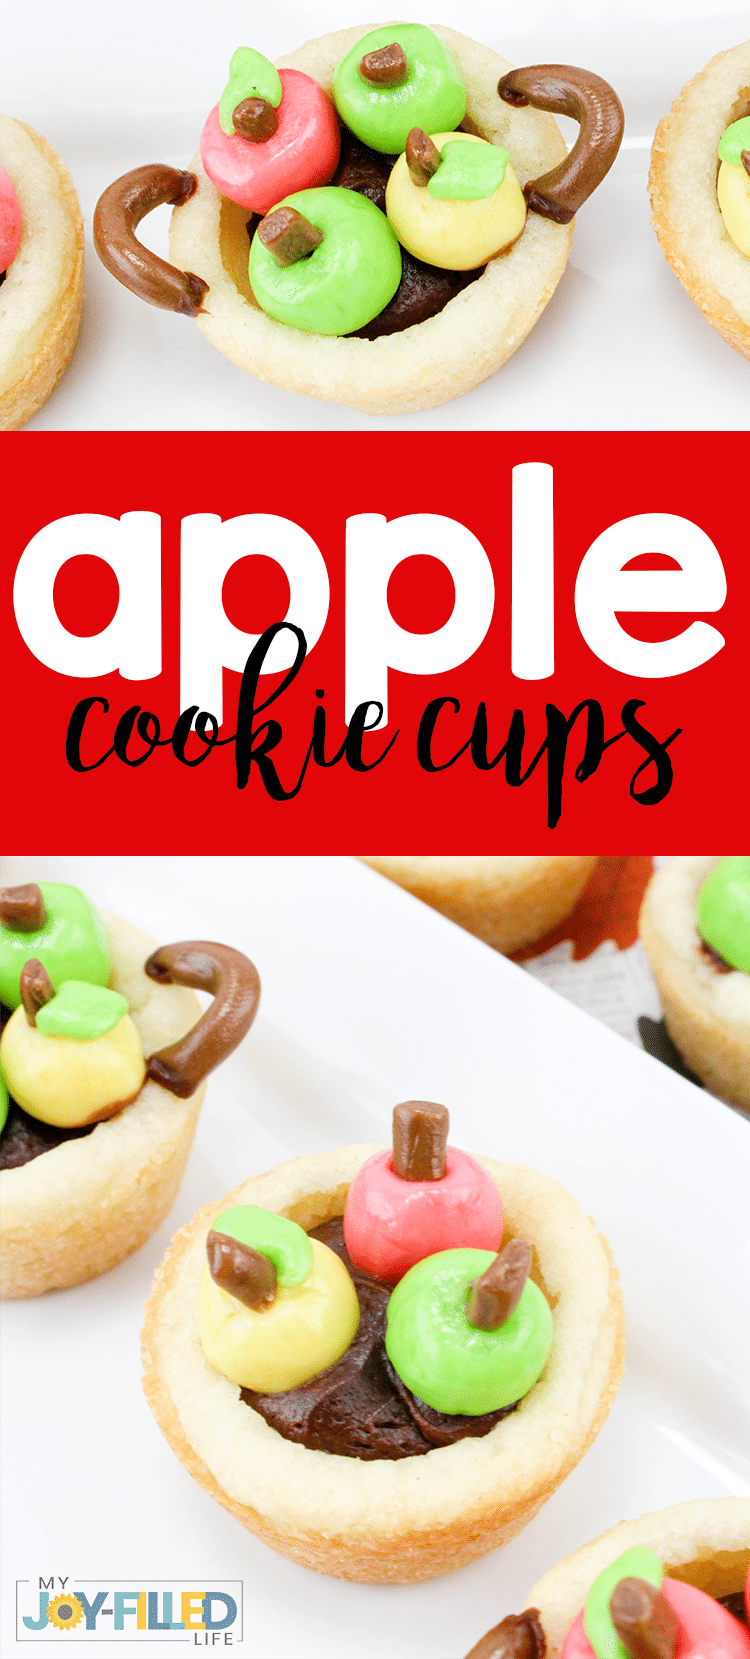 These apple cookie cups are a MUST TRY cookie recipe for fall! They are so fun to make and everyone is sure to rave about these cookie cups! They are sweet, delicious, and a pure joy to get in the spirit of the fall season. #apples #cookies #falltreat